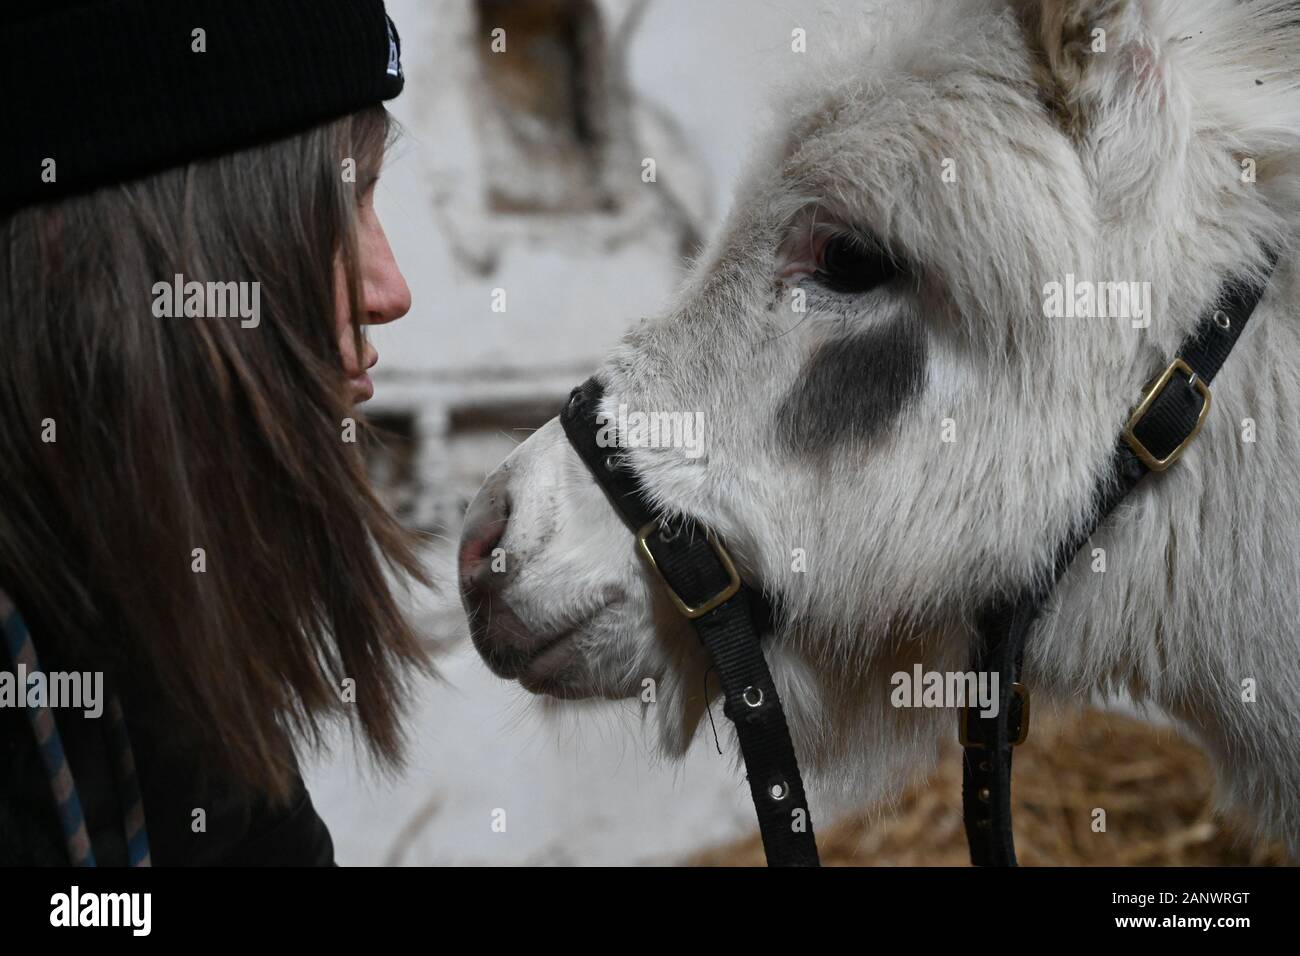 Miniature donkey and woman showing close human and animal relationship, love and friendship concept Stock Photo